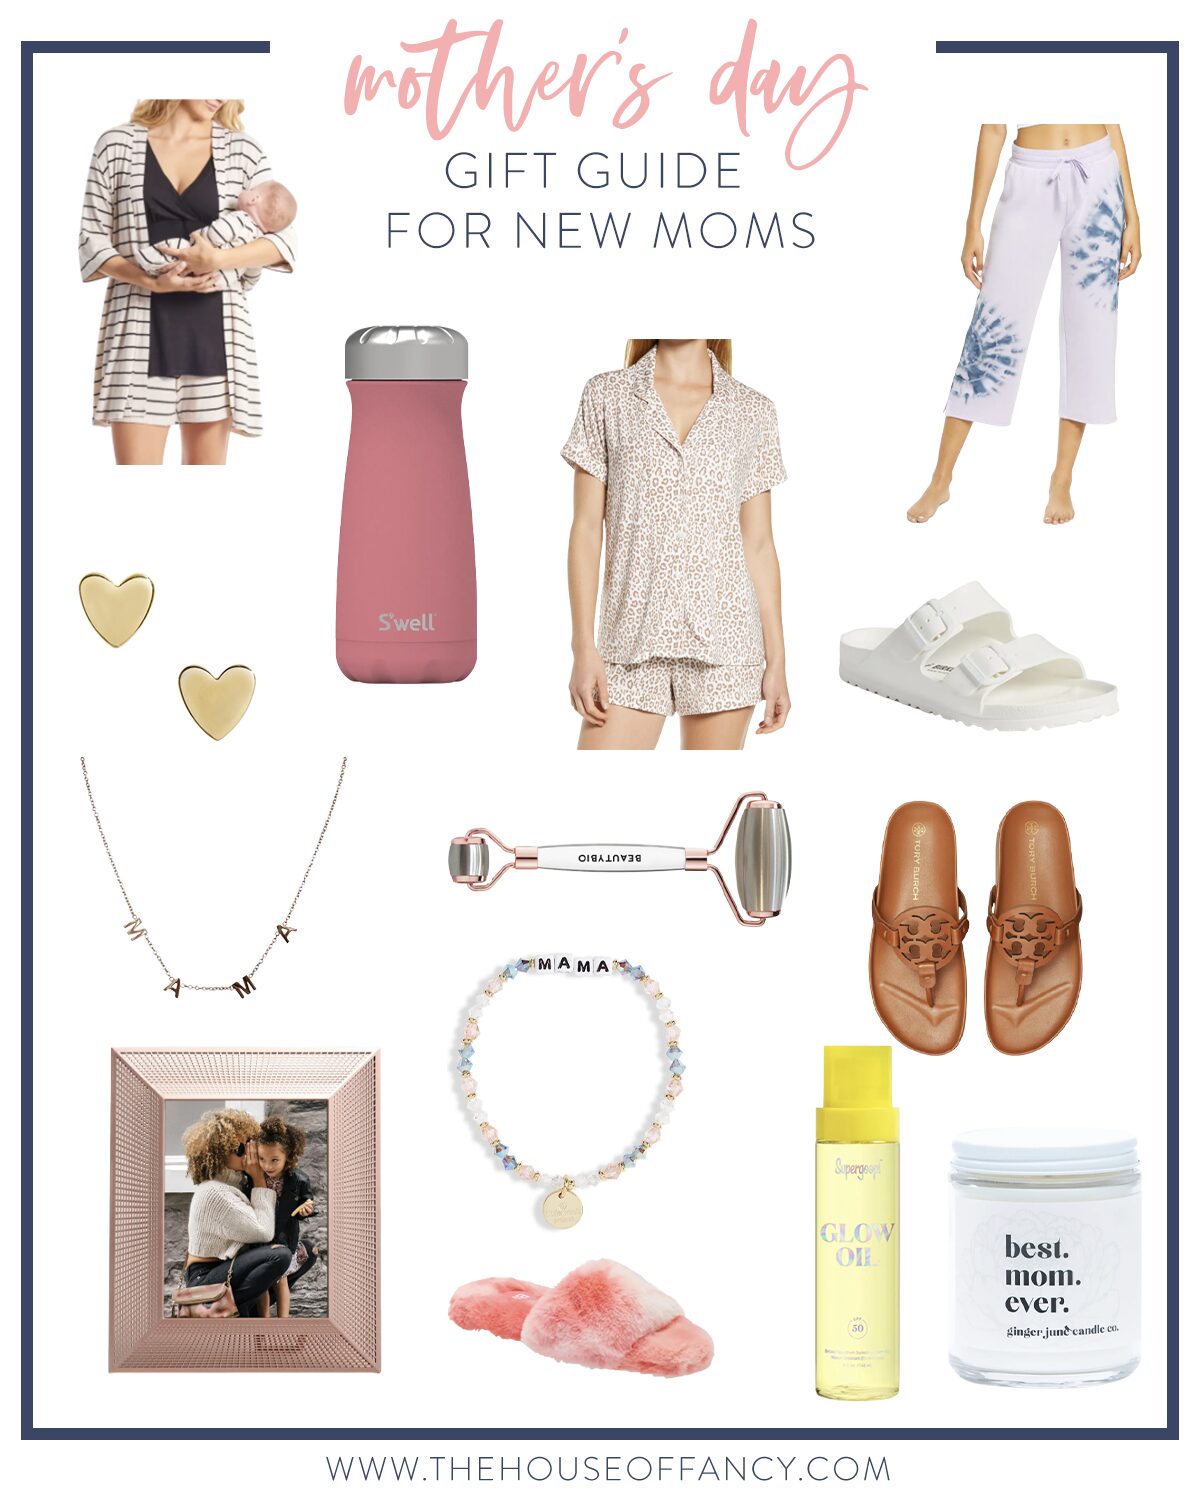 Mother's Day Gift Ideas by popular Houston life and style blog, The House of Fancy: collage image of heart post earrings, mama necklace, face roller, Tory Burch slide sandals, fuzzy slippers, digital picture frame, white Birkenstock sandals, mommy and me pj set, leopard print pj set, and best mom ever candle. 